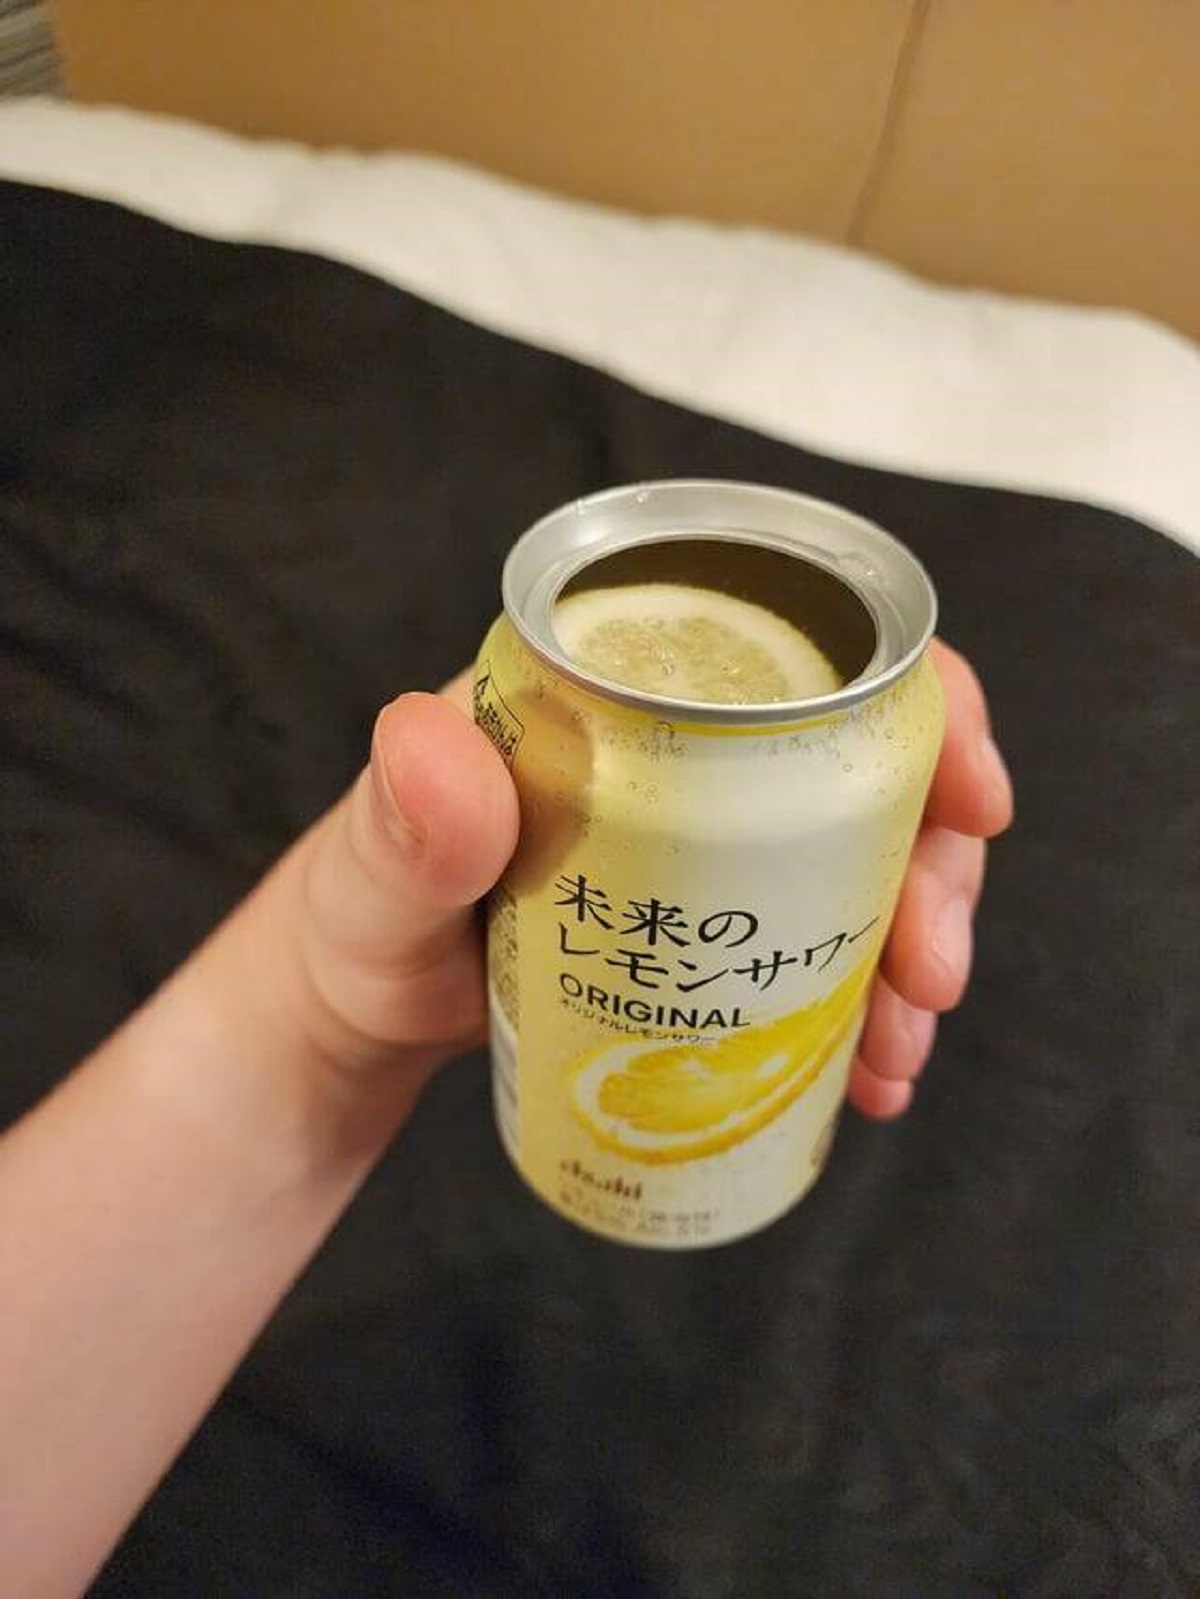 "There's a real lemon slice inside the can of this new Japanese drink"